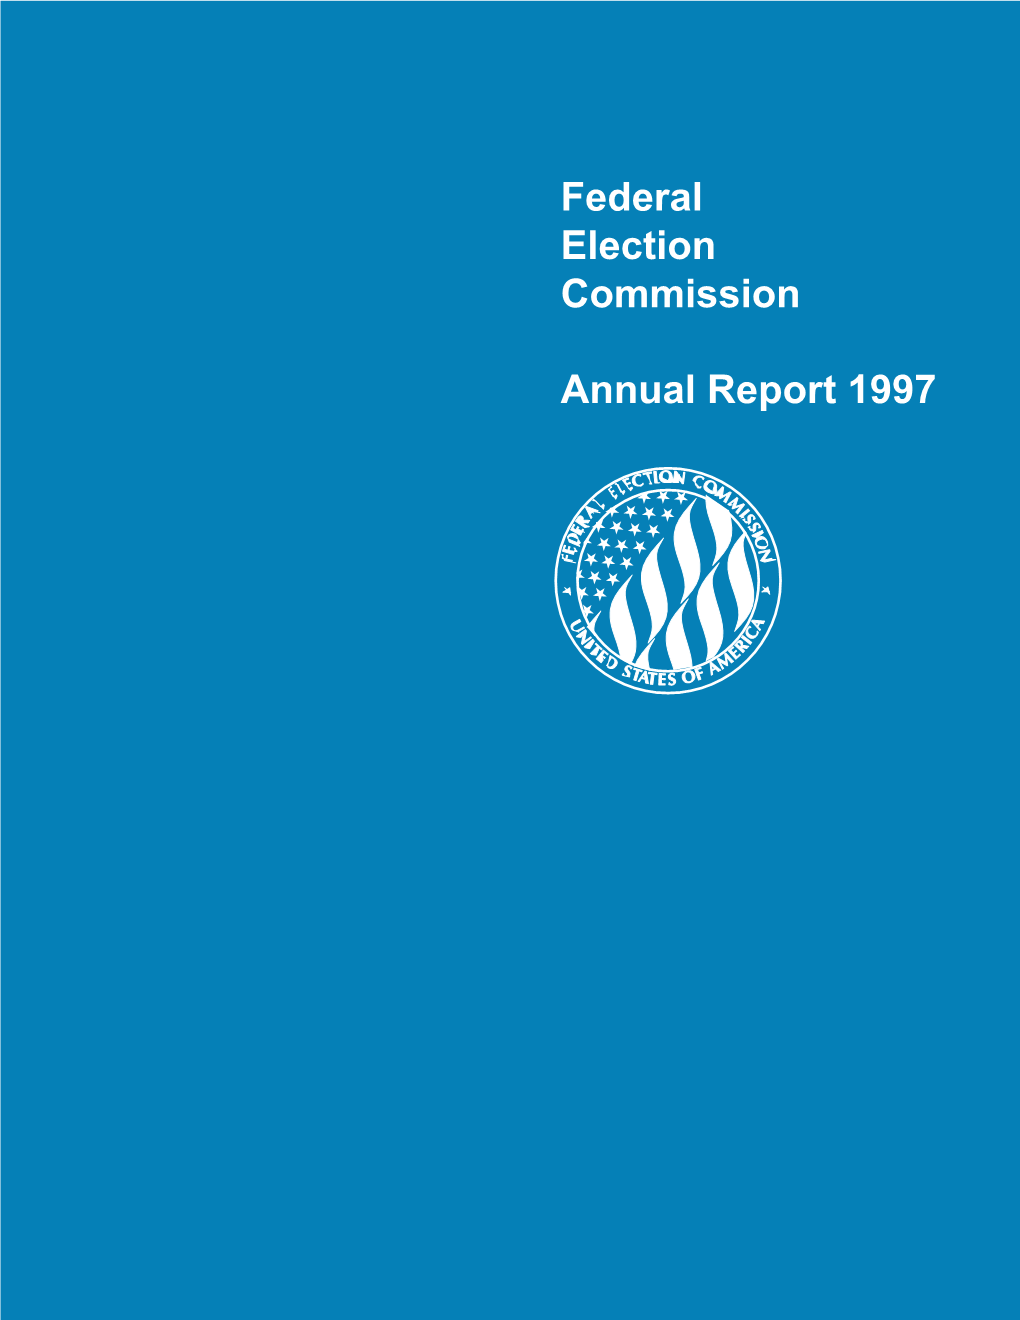 Federal Election Commission Annual Report 1997